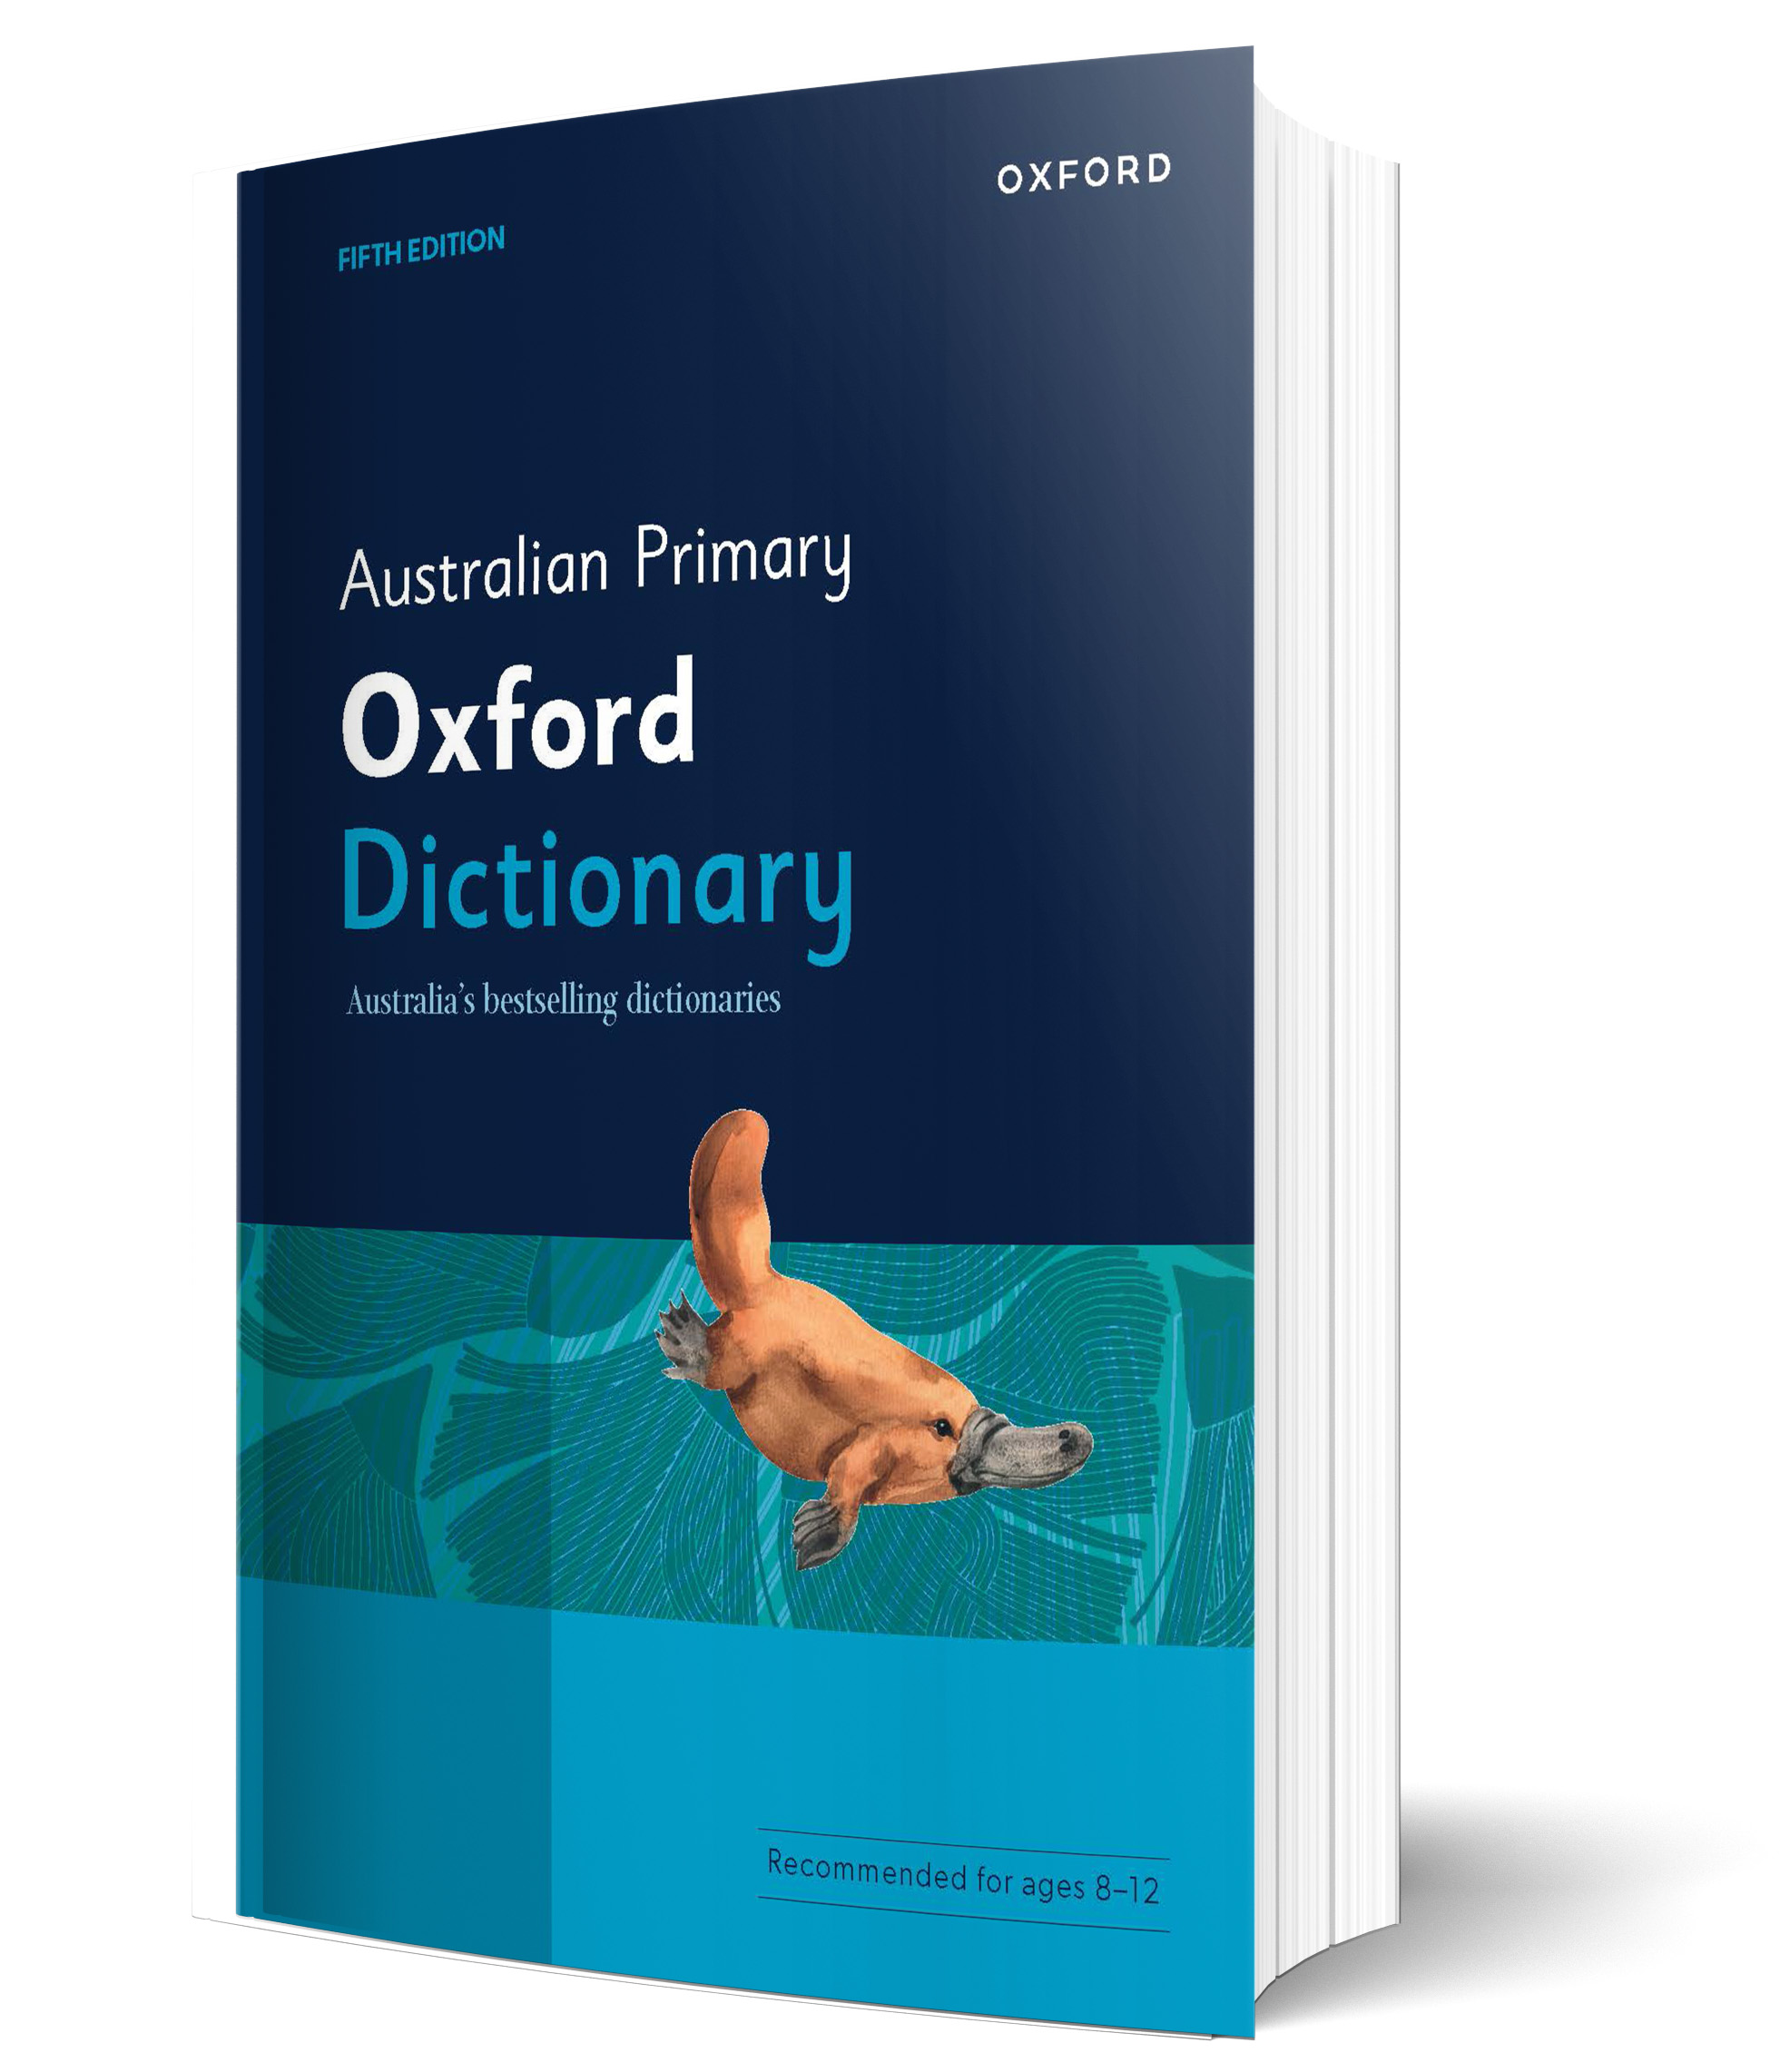 Australian Middle Primary Oxford Dictionary